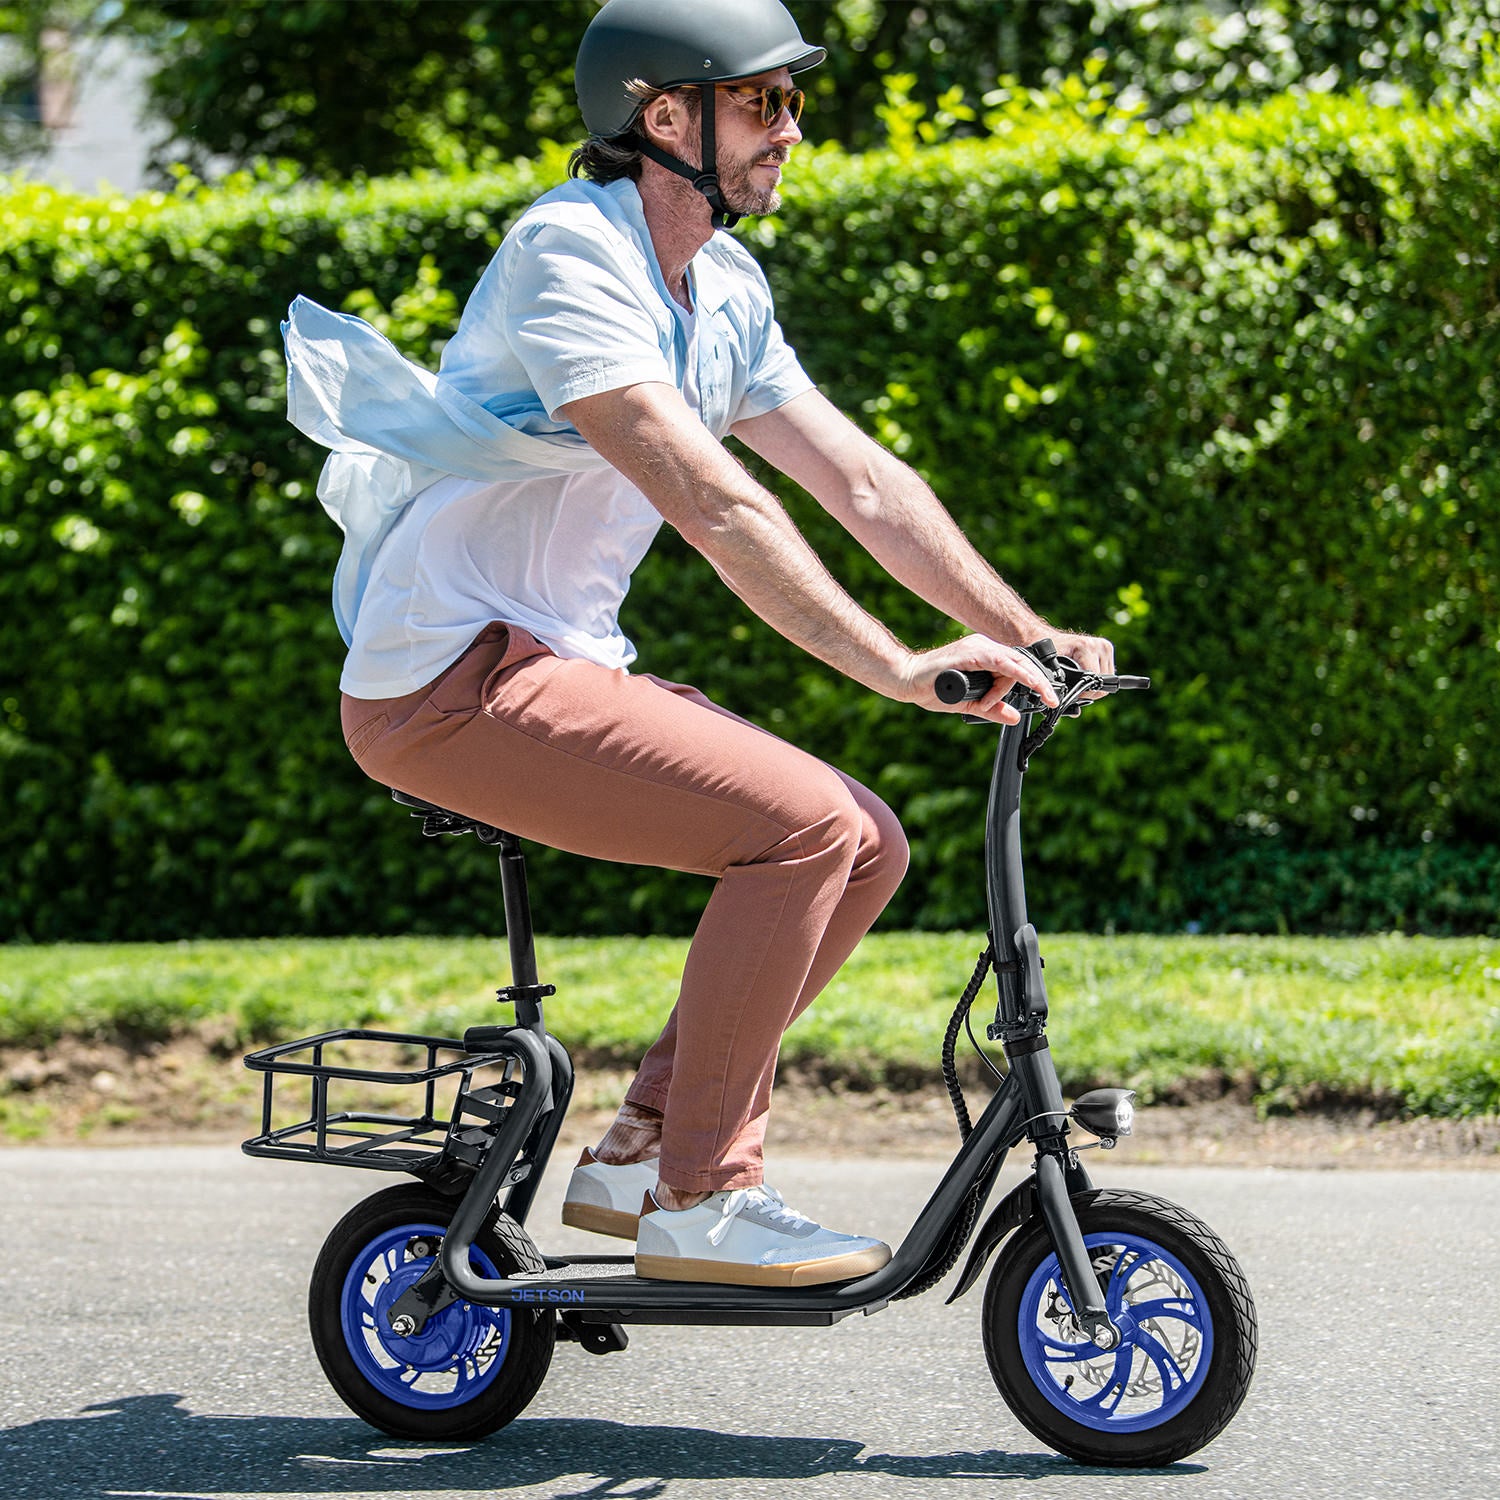 side view of person riding the Ryder electric scooter